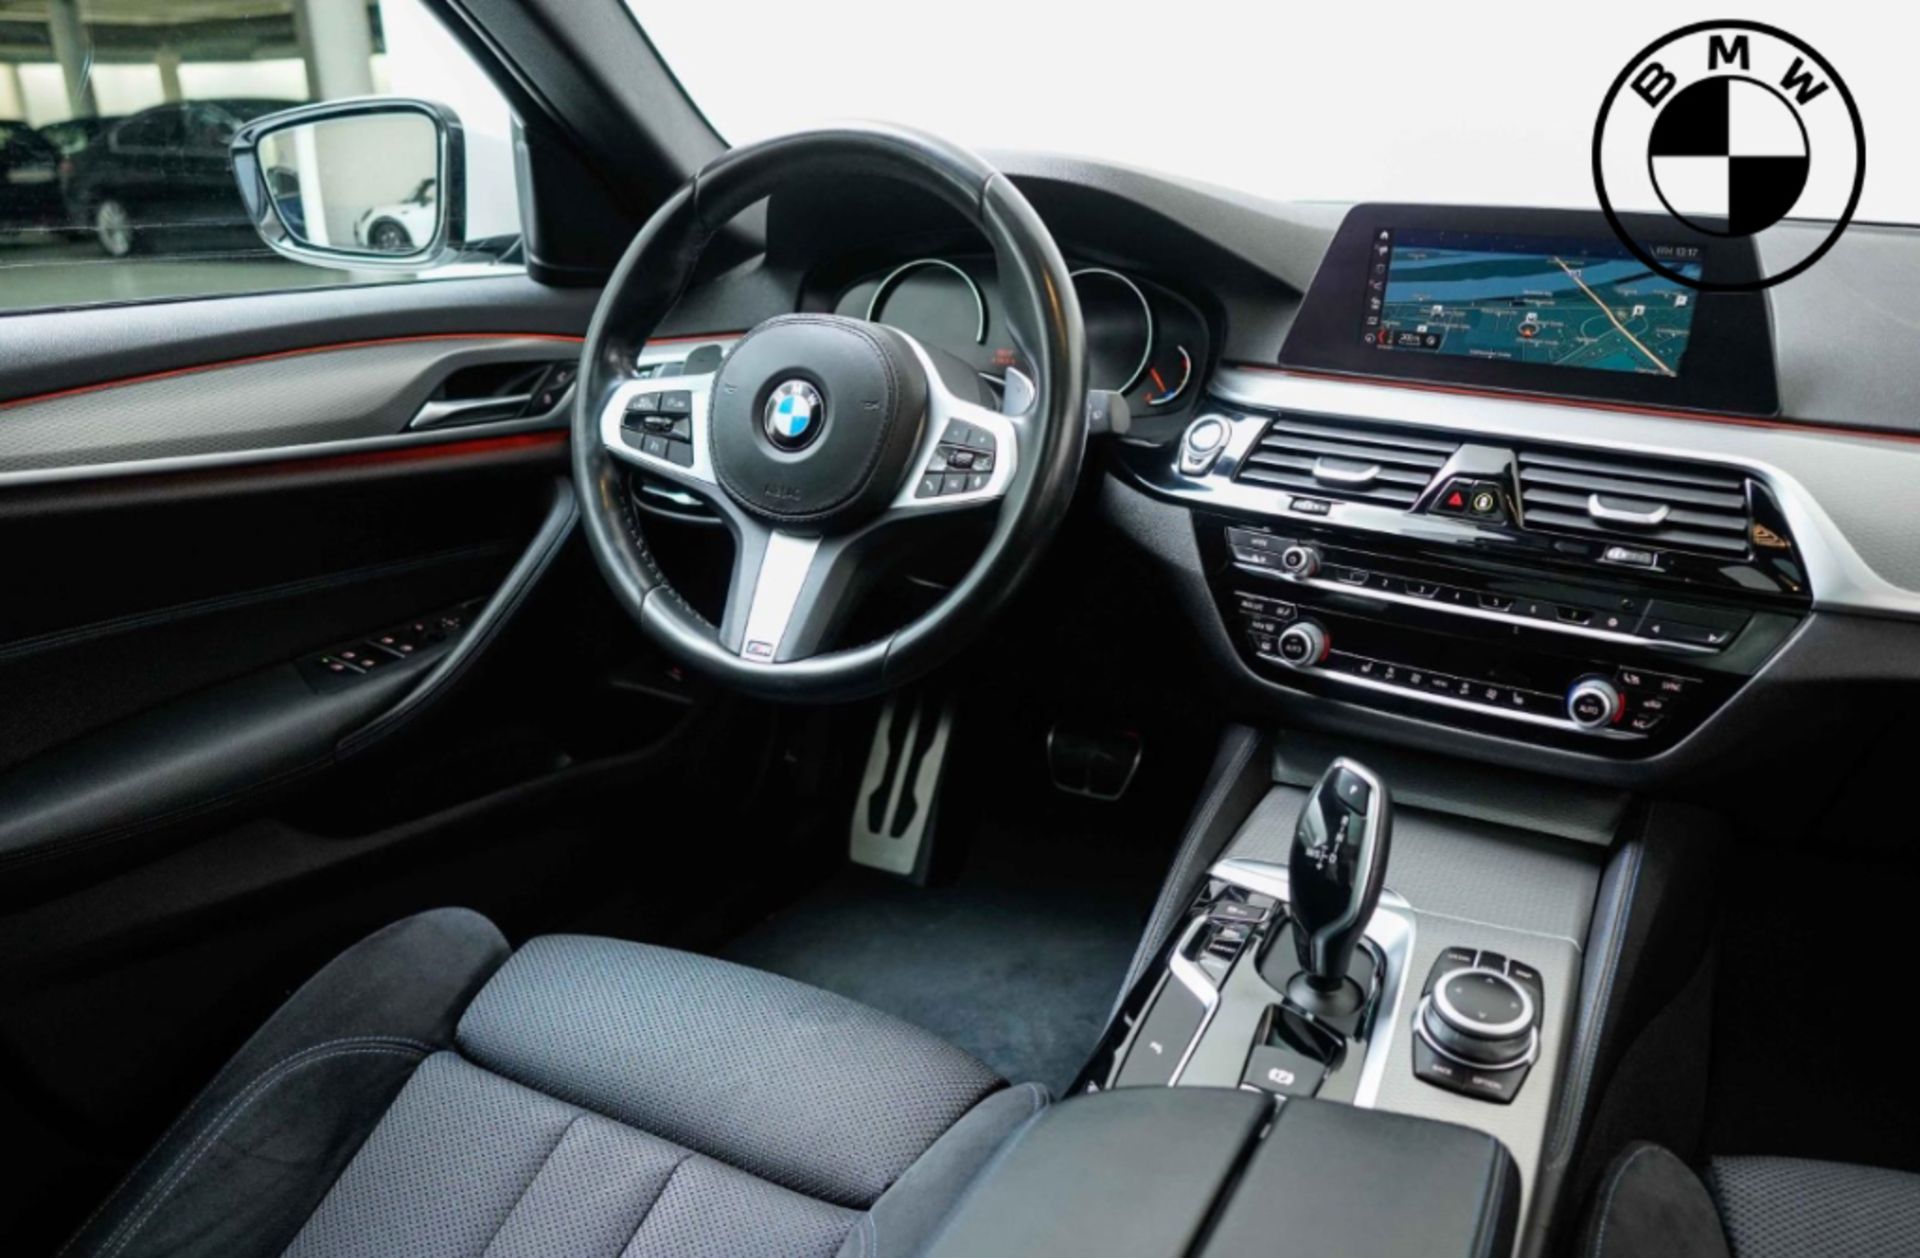 BMW 520d Touring - Image 7 of 9